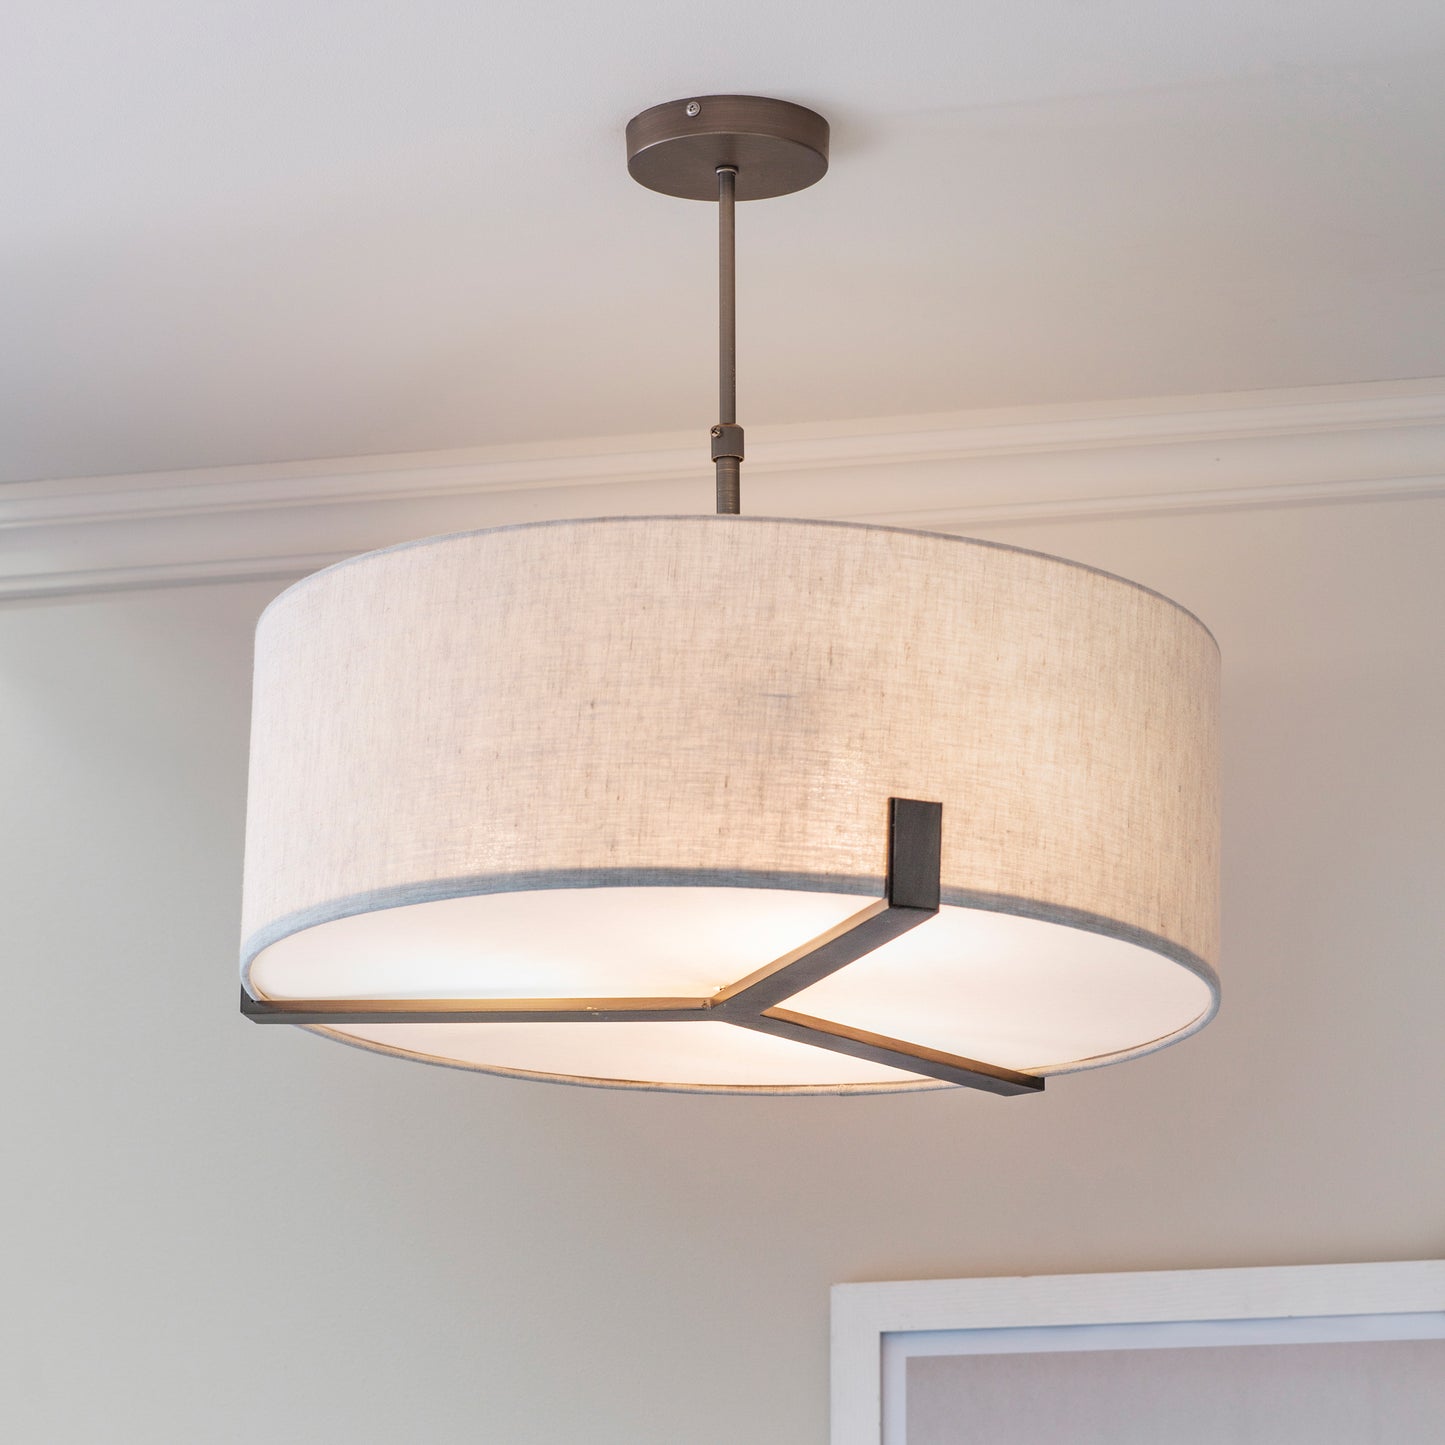 A Bronze/Natural pendant light with a white shade, perfect for home furniture and interior decor.